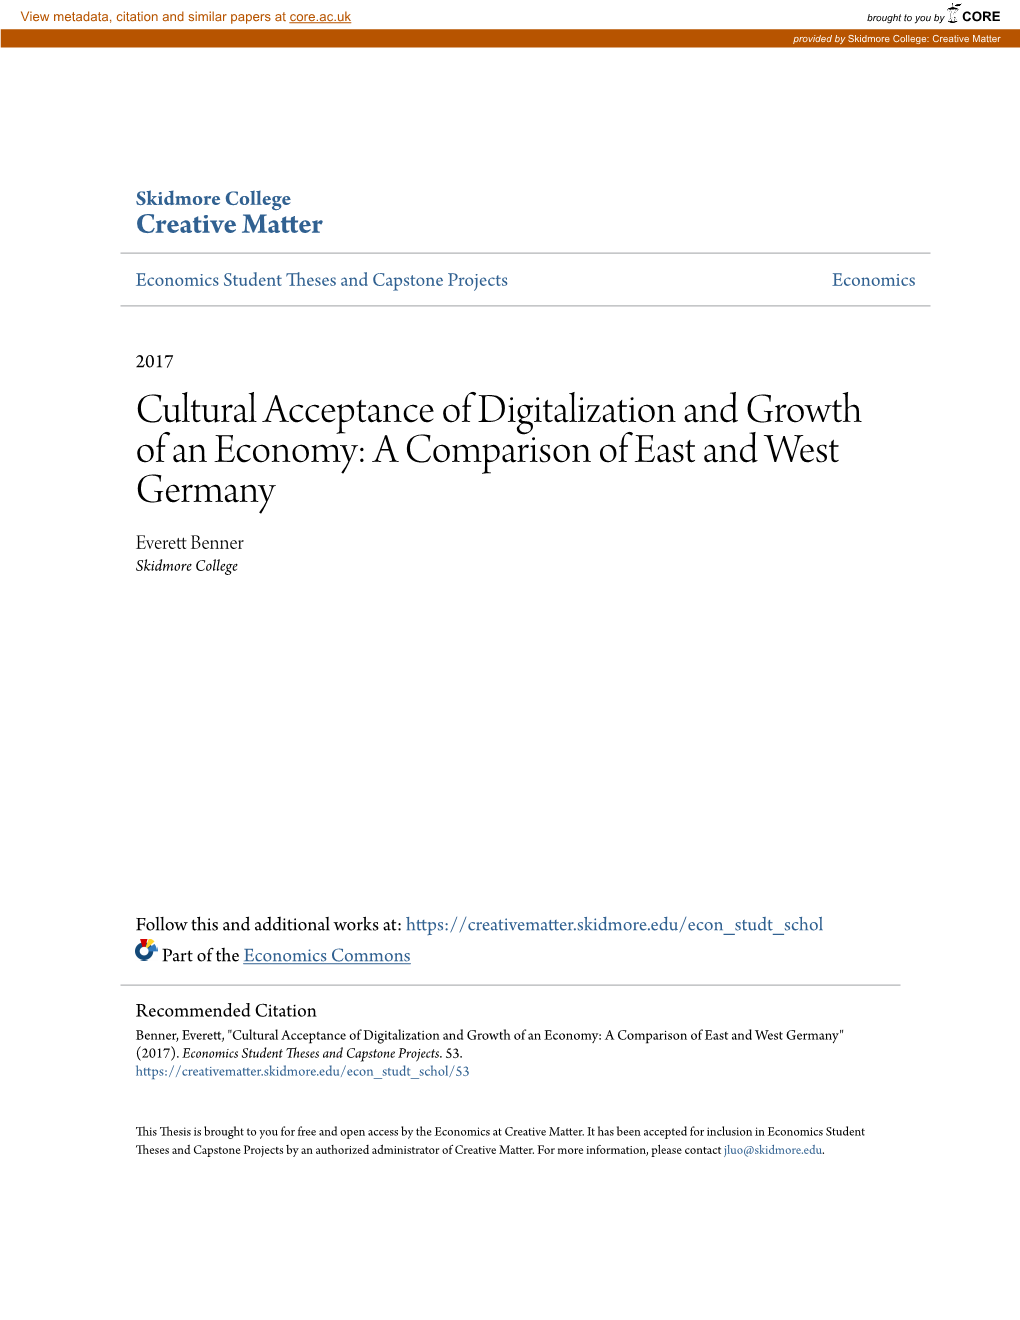 Cultural Acceptance of Digitalization and Growth of an Economy: a Comparison of East and West Germany Everett Benner Skidmore College